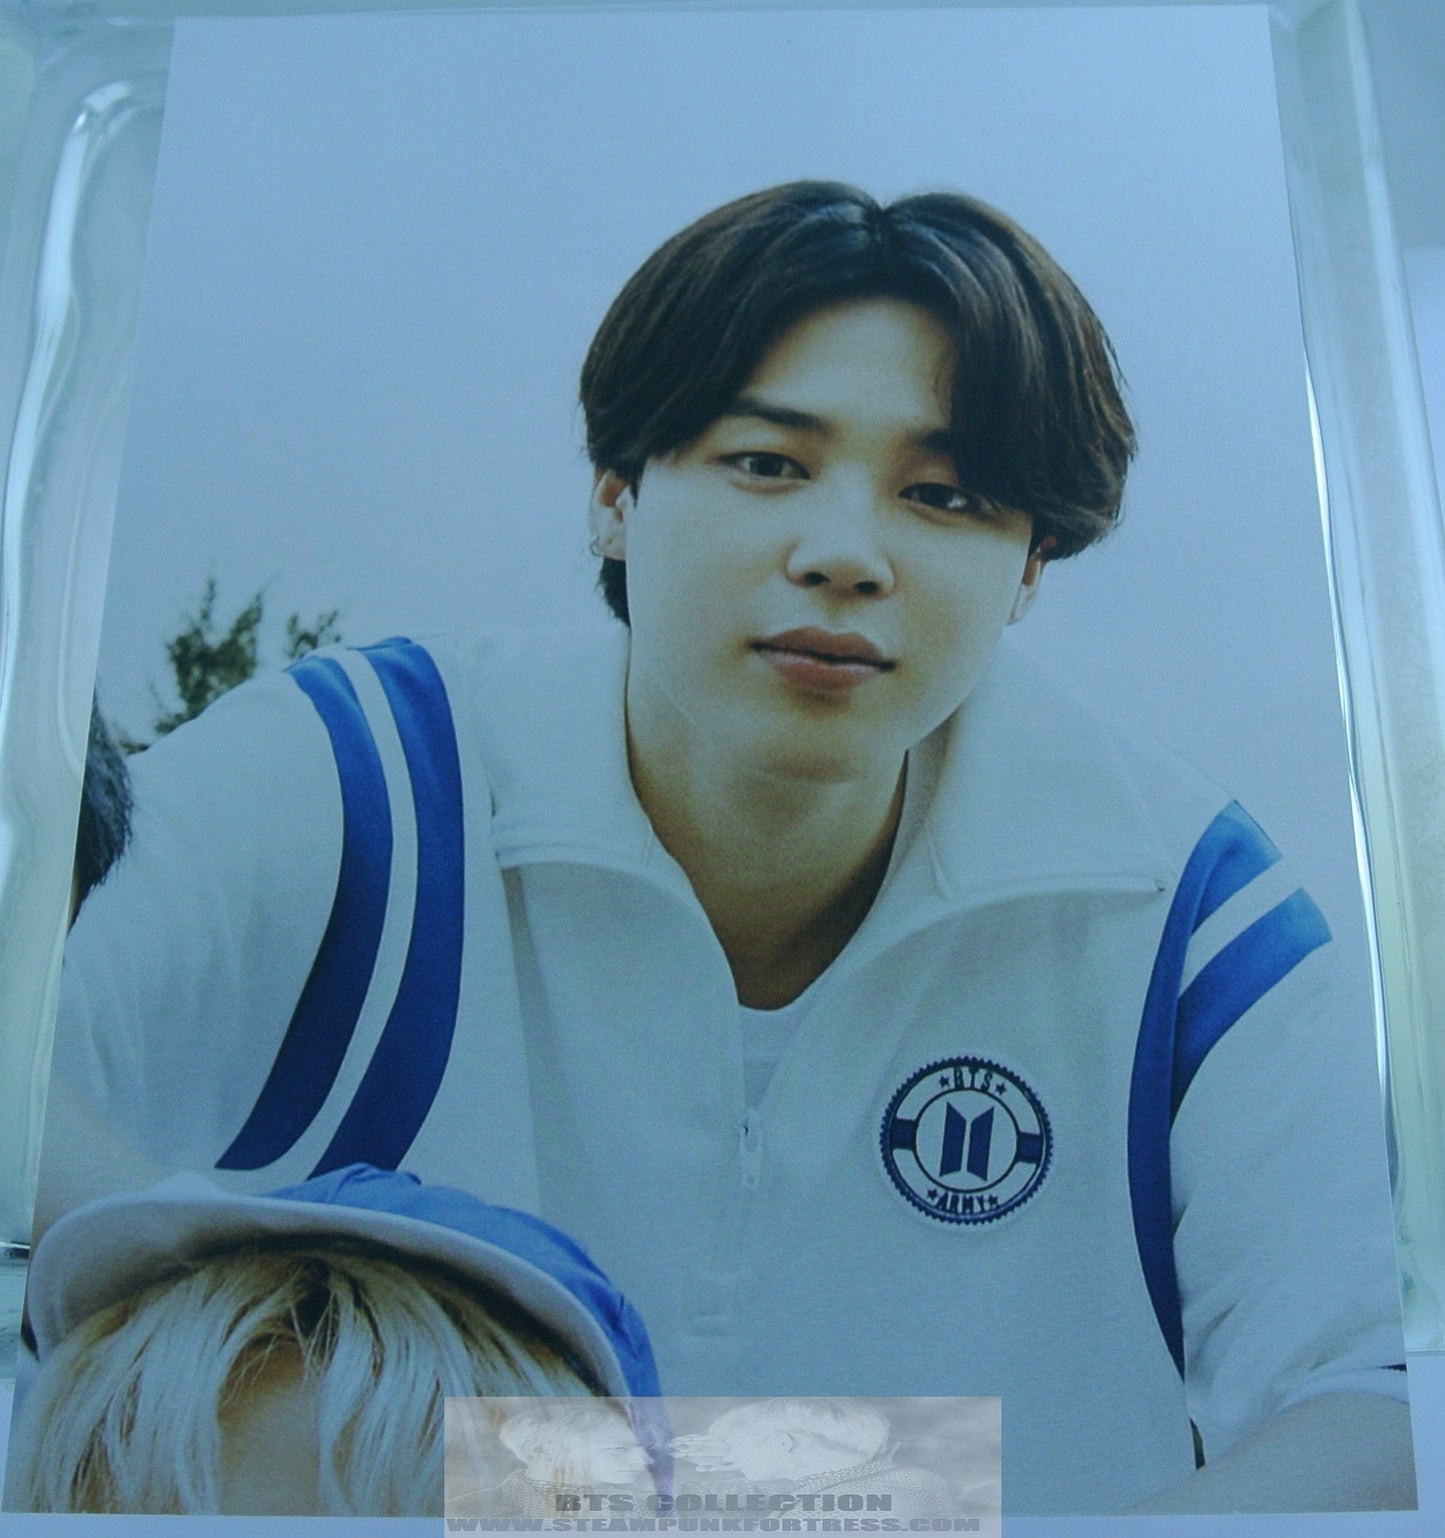 BTS JIMIN PARK ID: CHAOS SPECIAL PHOTOFOLIO MINI POSTER PHOTOS BOOK NEW OFFICIAL MERCHANDISE